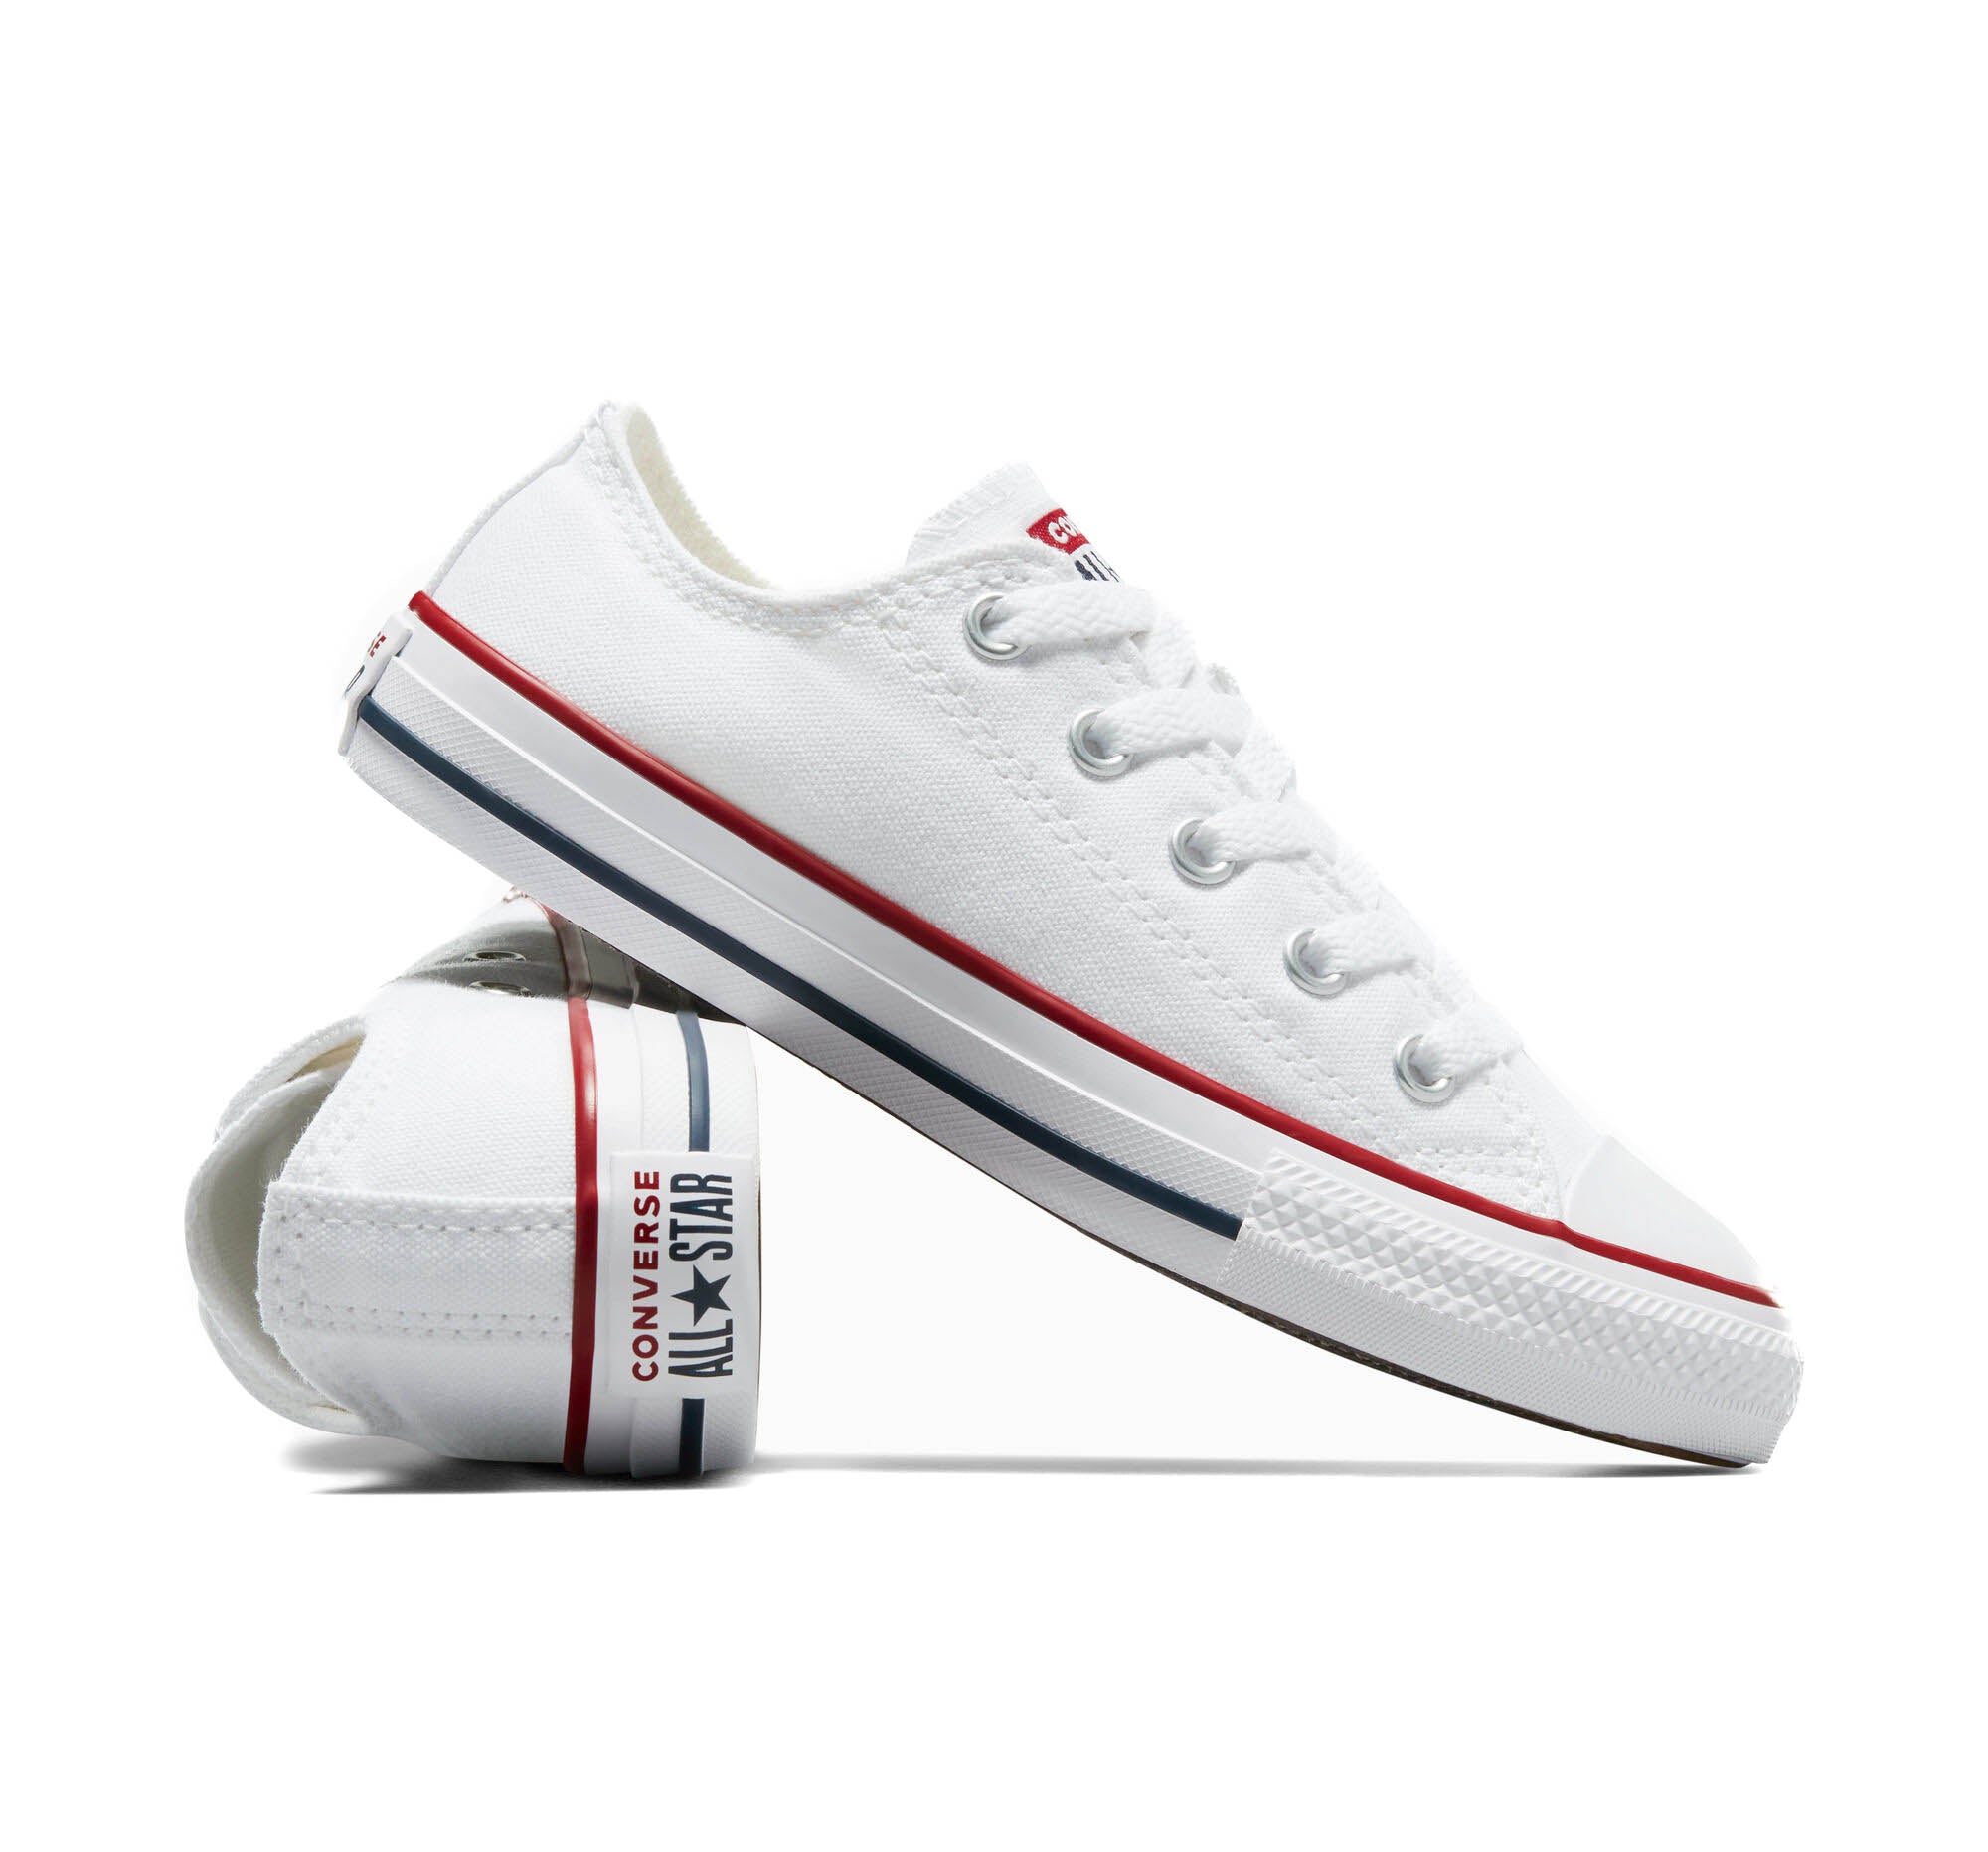 Youth Chuck Taylor All Star Seasonal Low Ox - Optical White